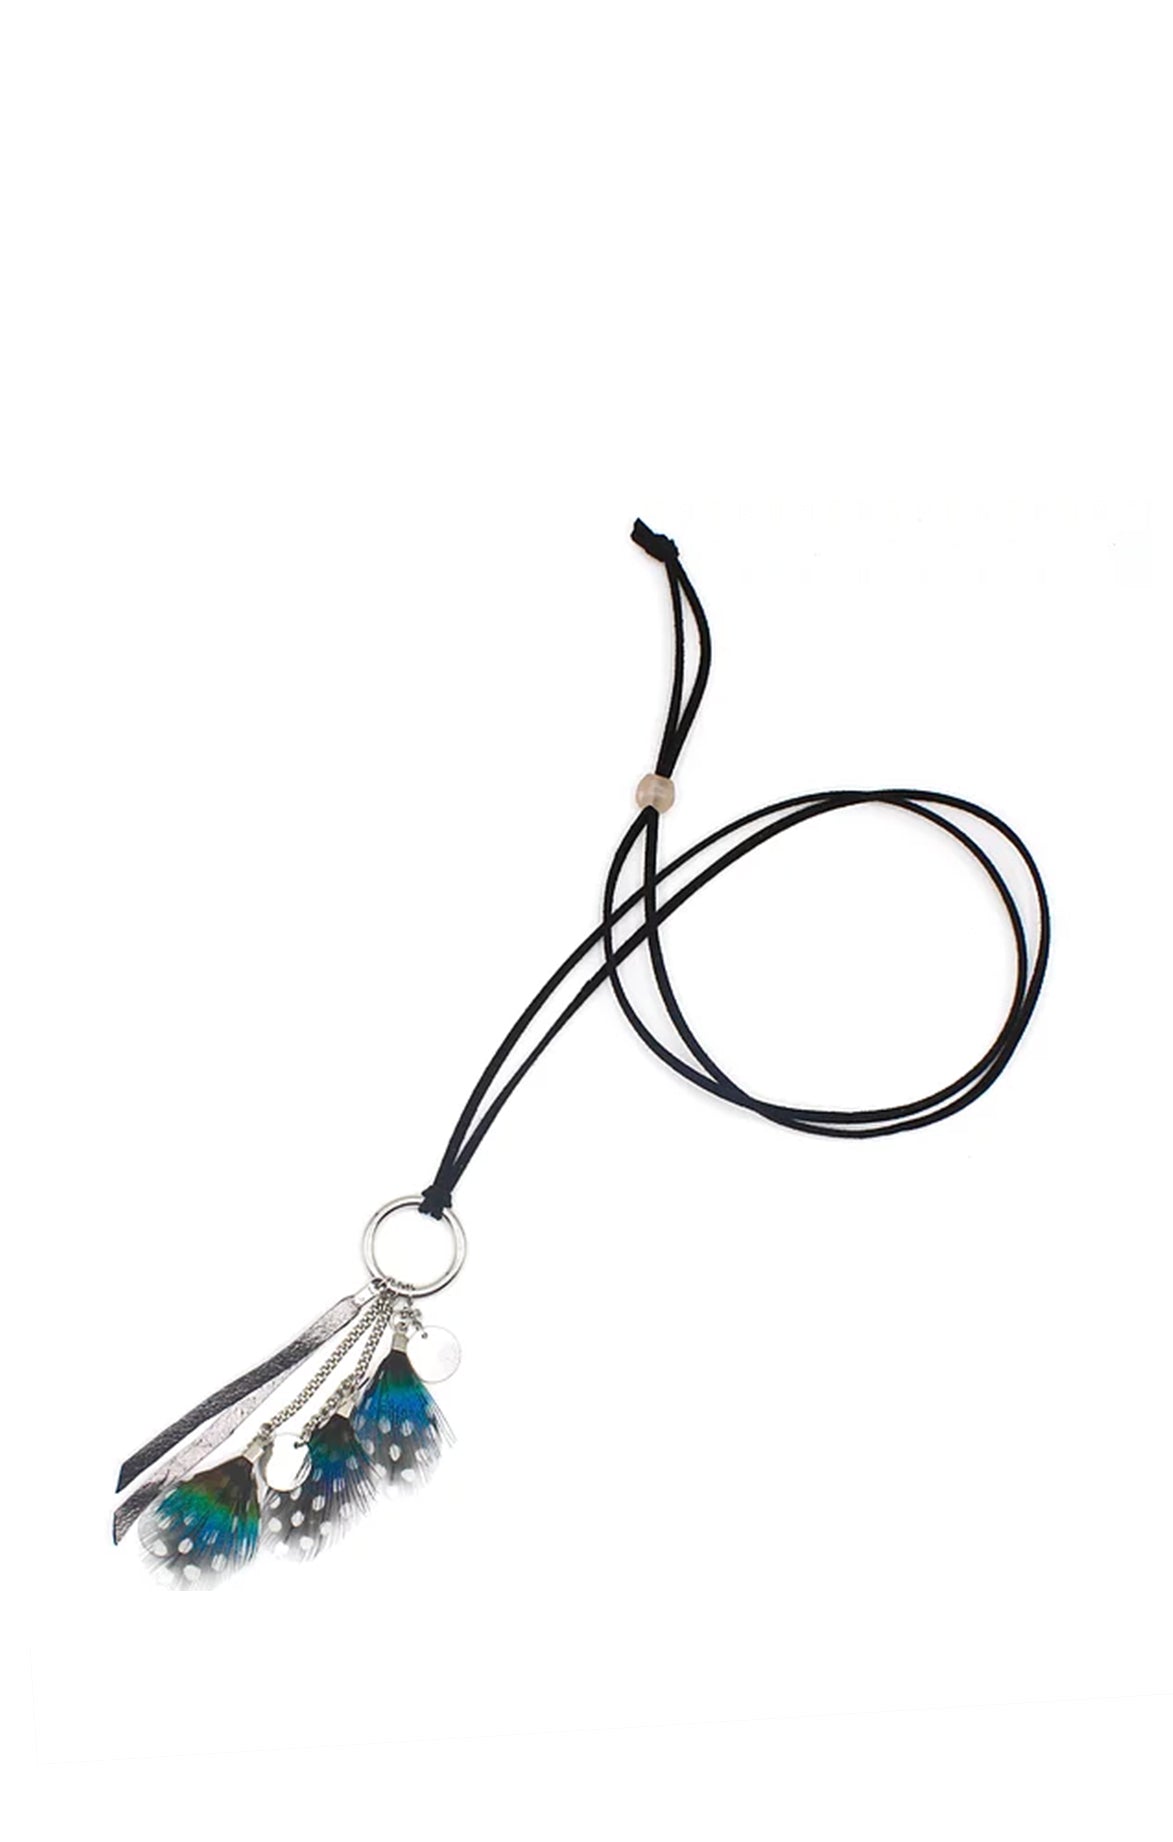 Peacock Blue Necklace with Feathers